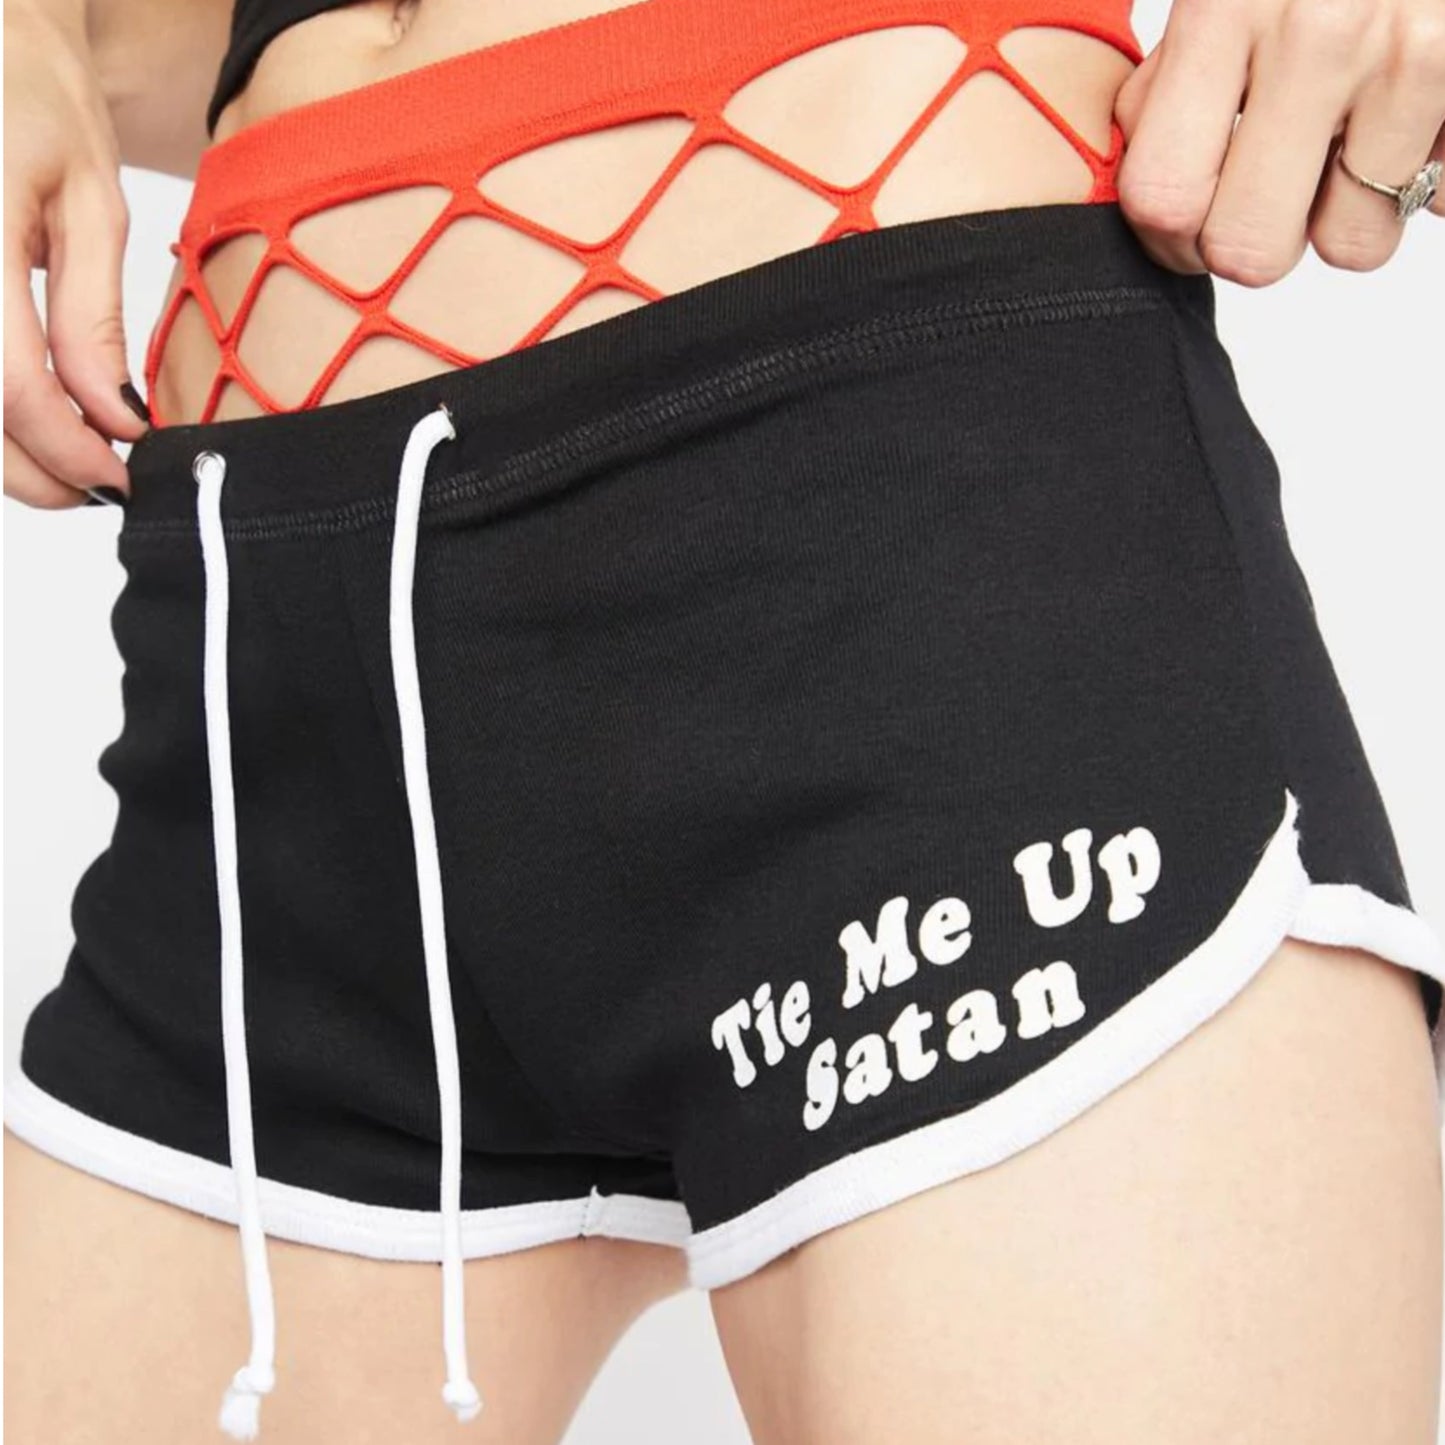 Black Dolphin Booty Shorts | Tie Me Up Satan Graphics Front & Back - Too Fast - Shorts